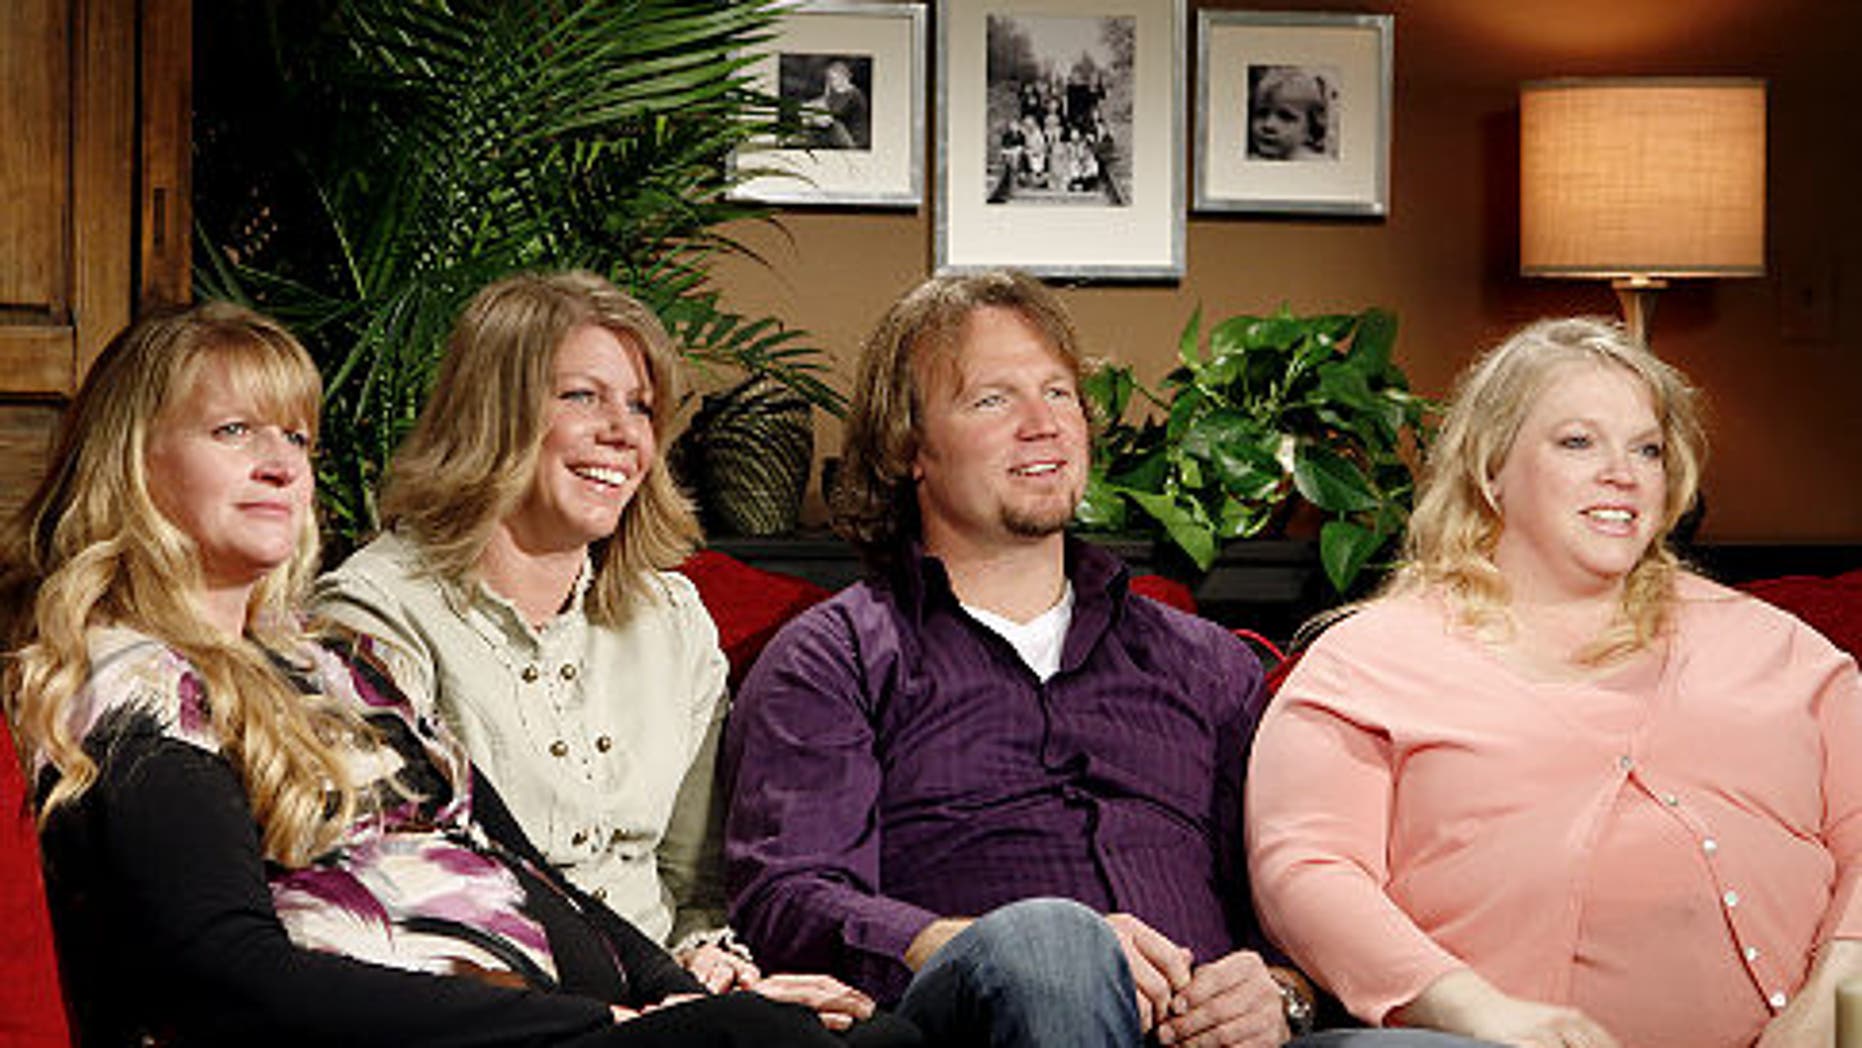 Sister Wives stars sue Utah, say polygamy ban is unconstitutional ... pic pic